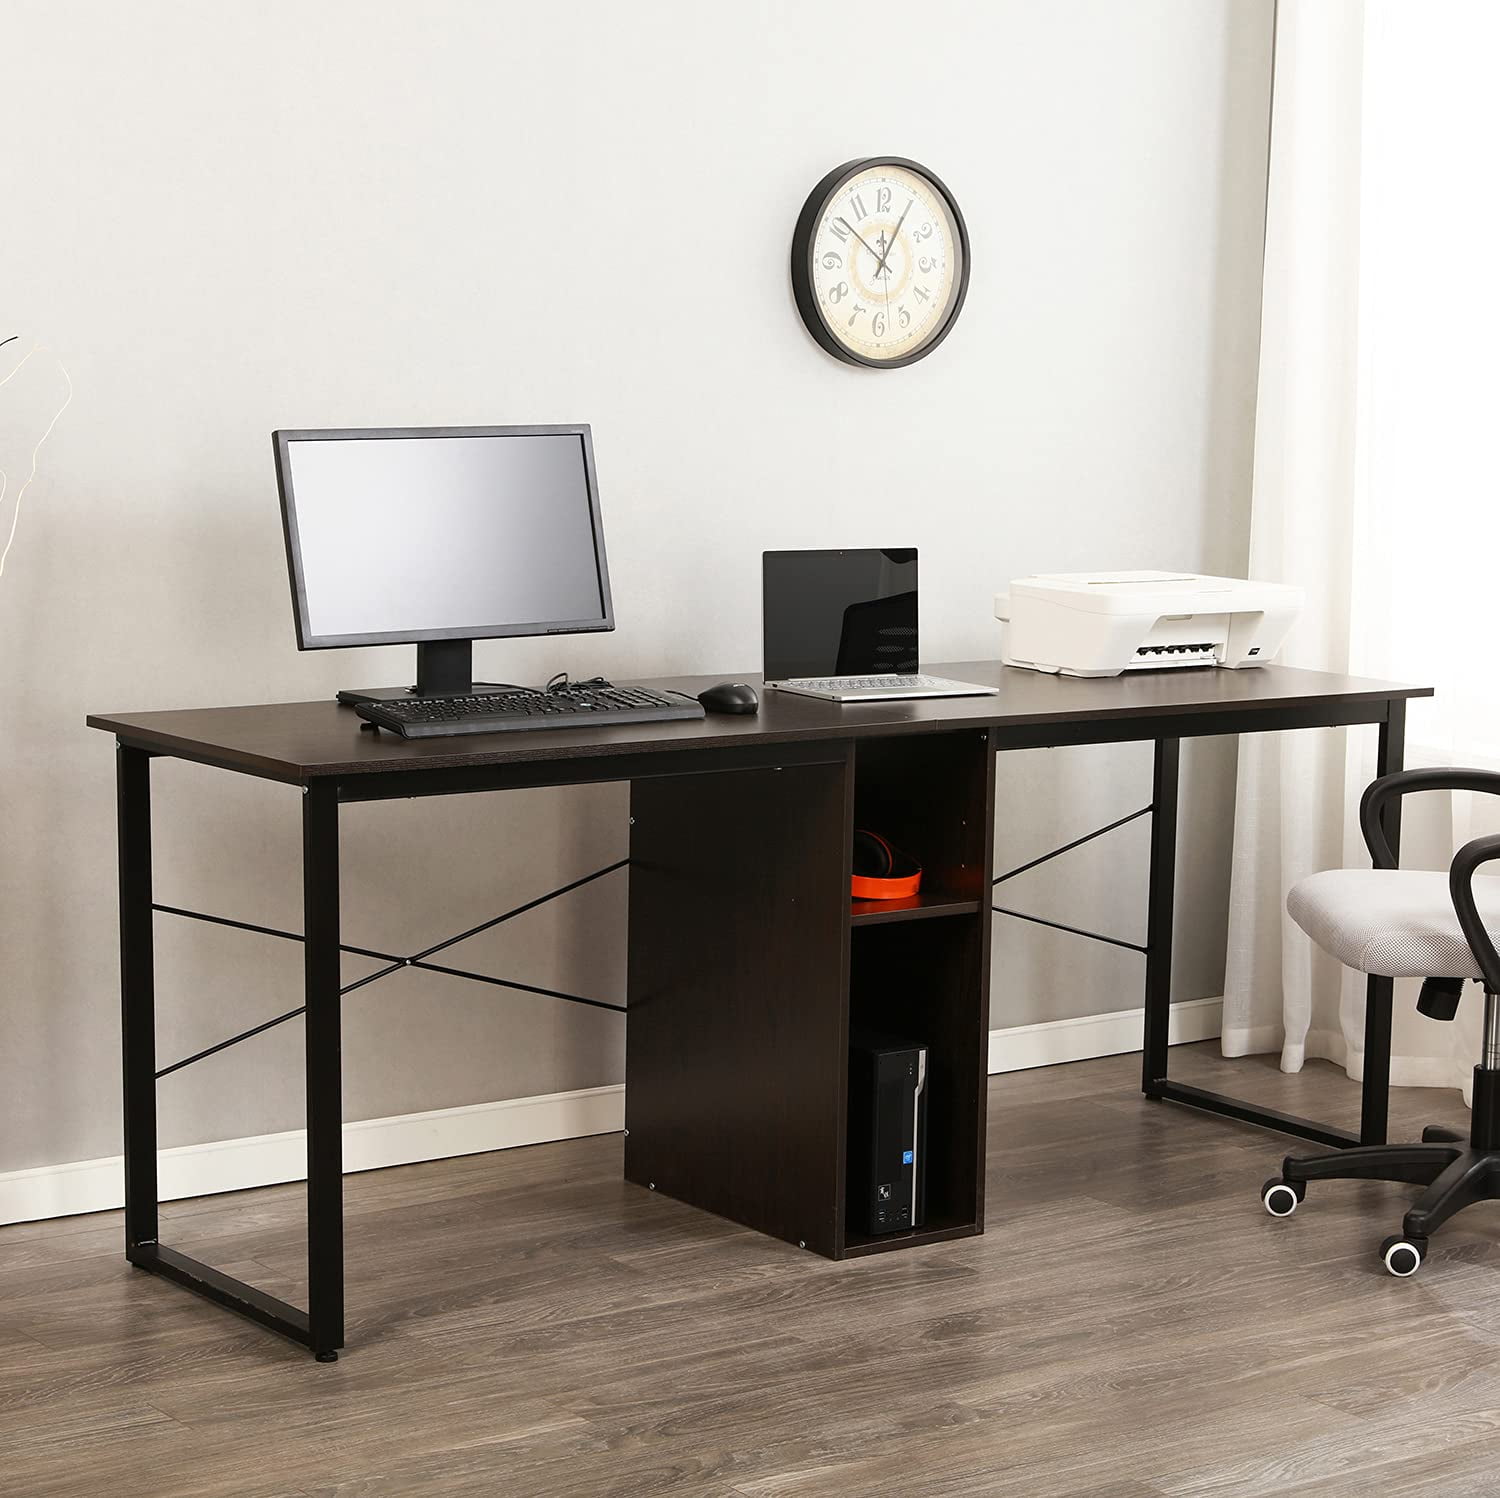 78" Extra Large Modern Double Workstation Computer Desk with Storage and Cabinet 